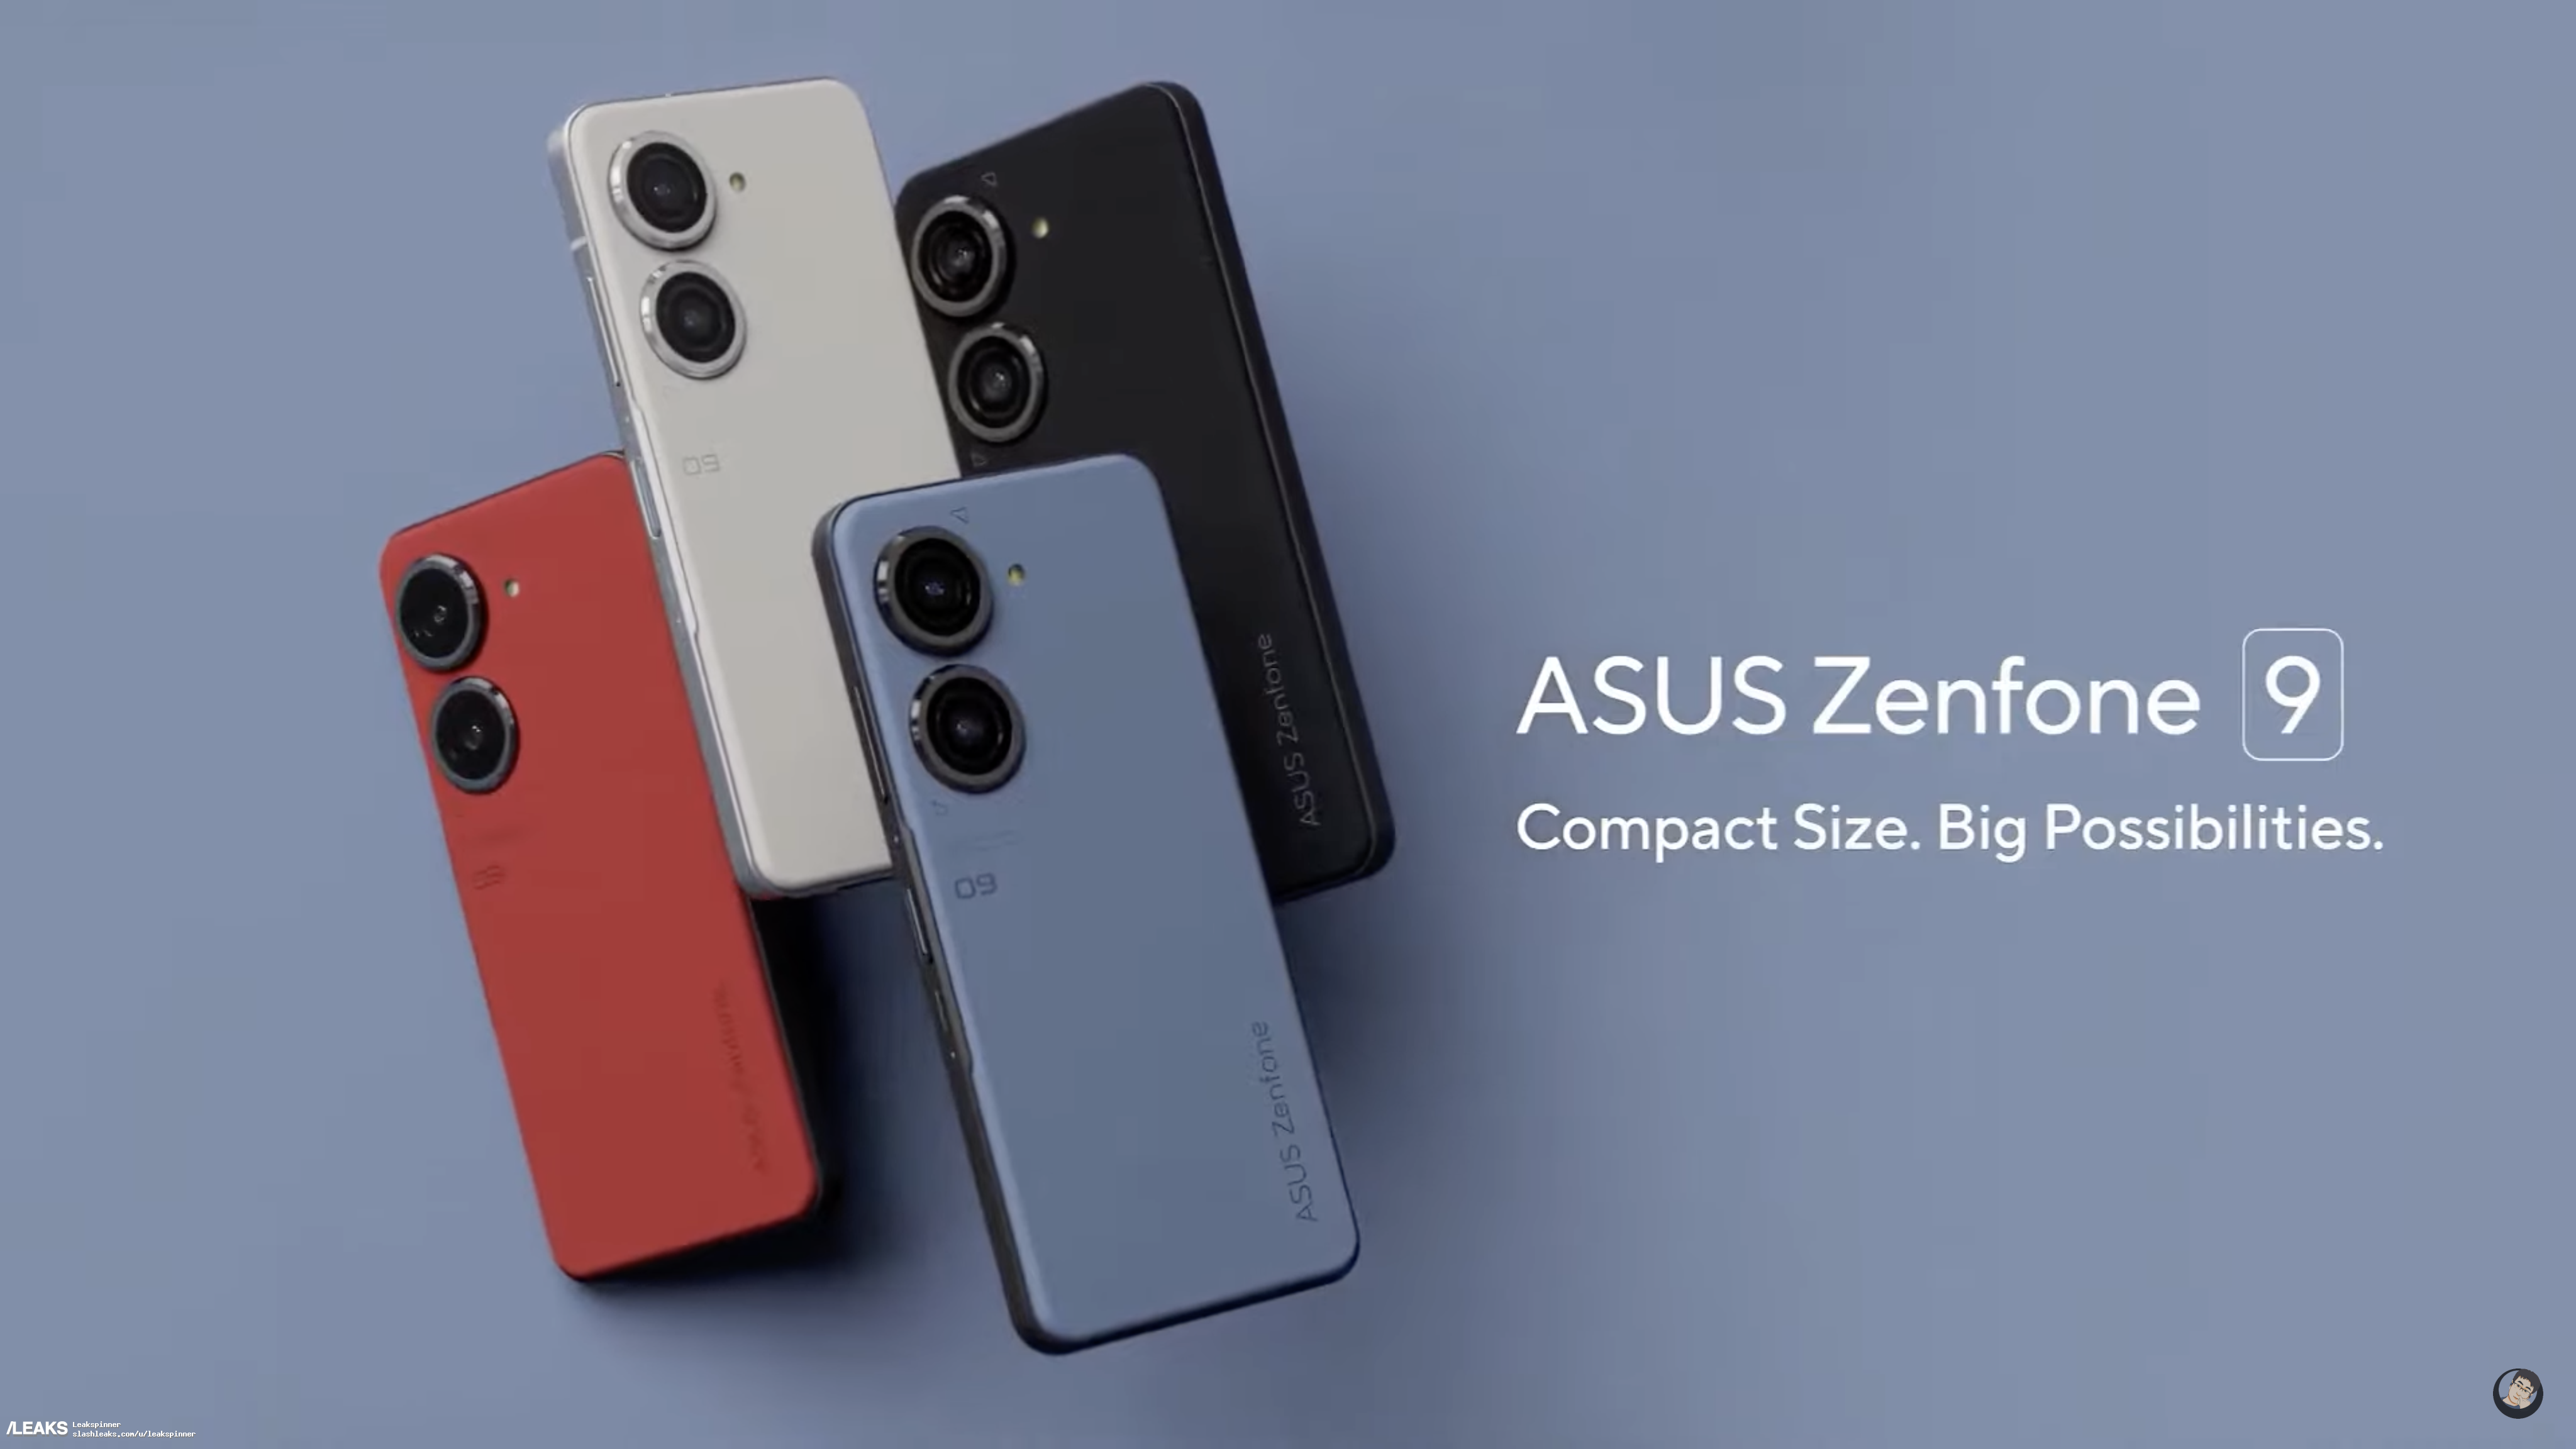 asus-zenfone-9-promo-video-leaks-out.png